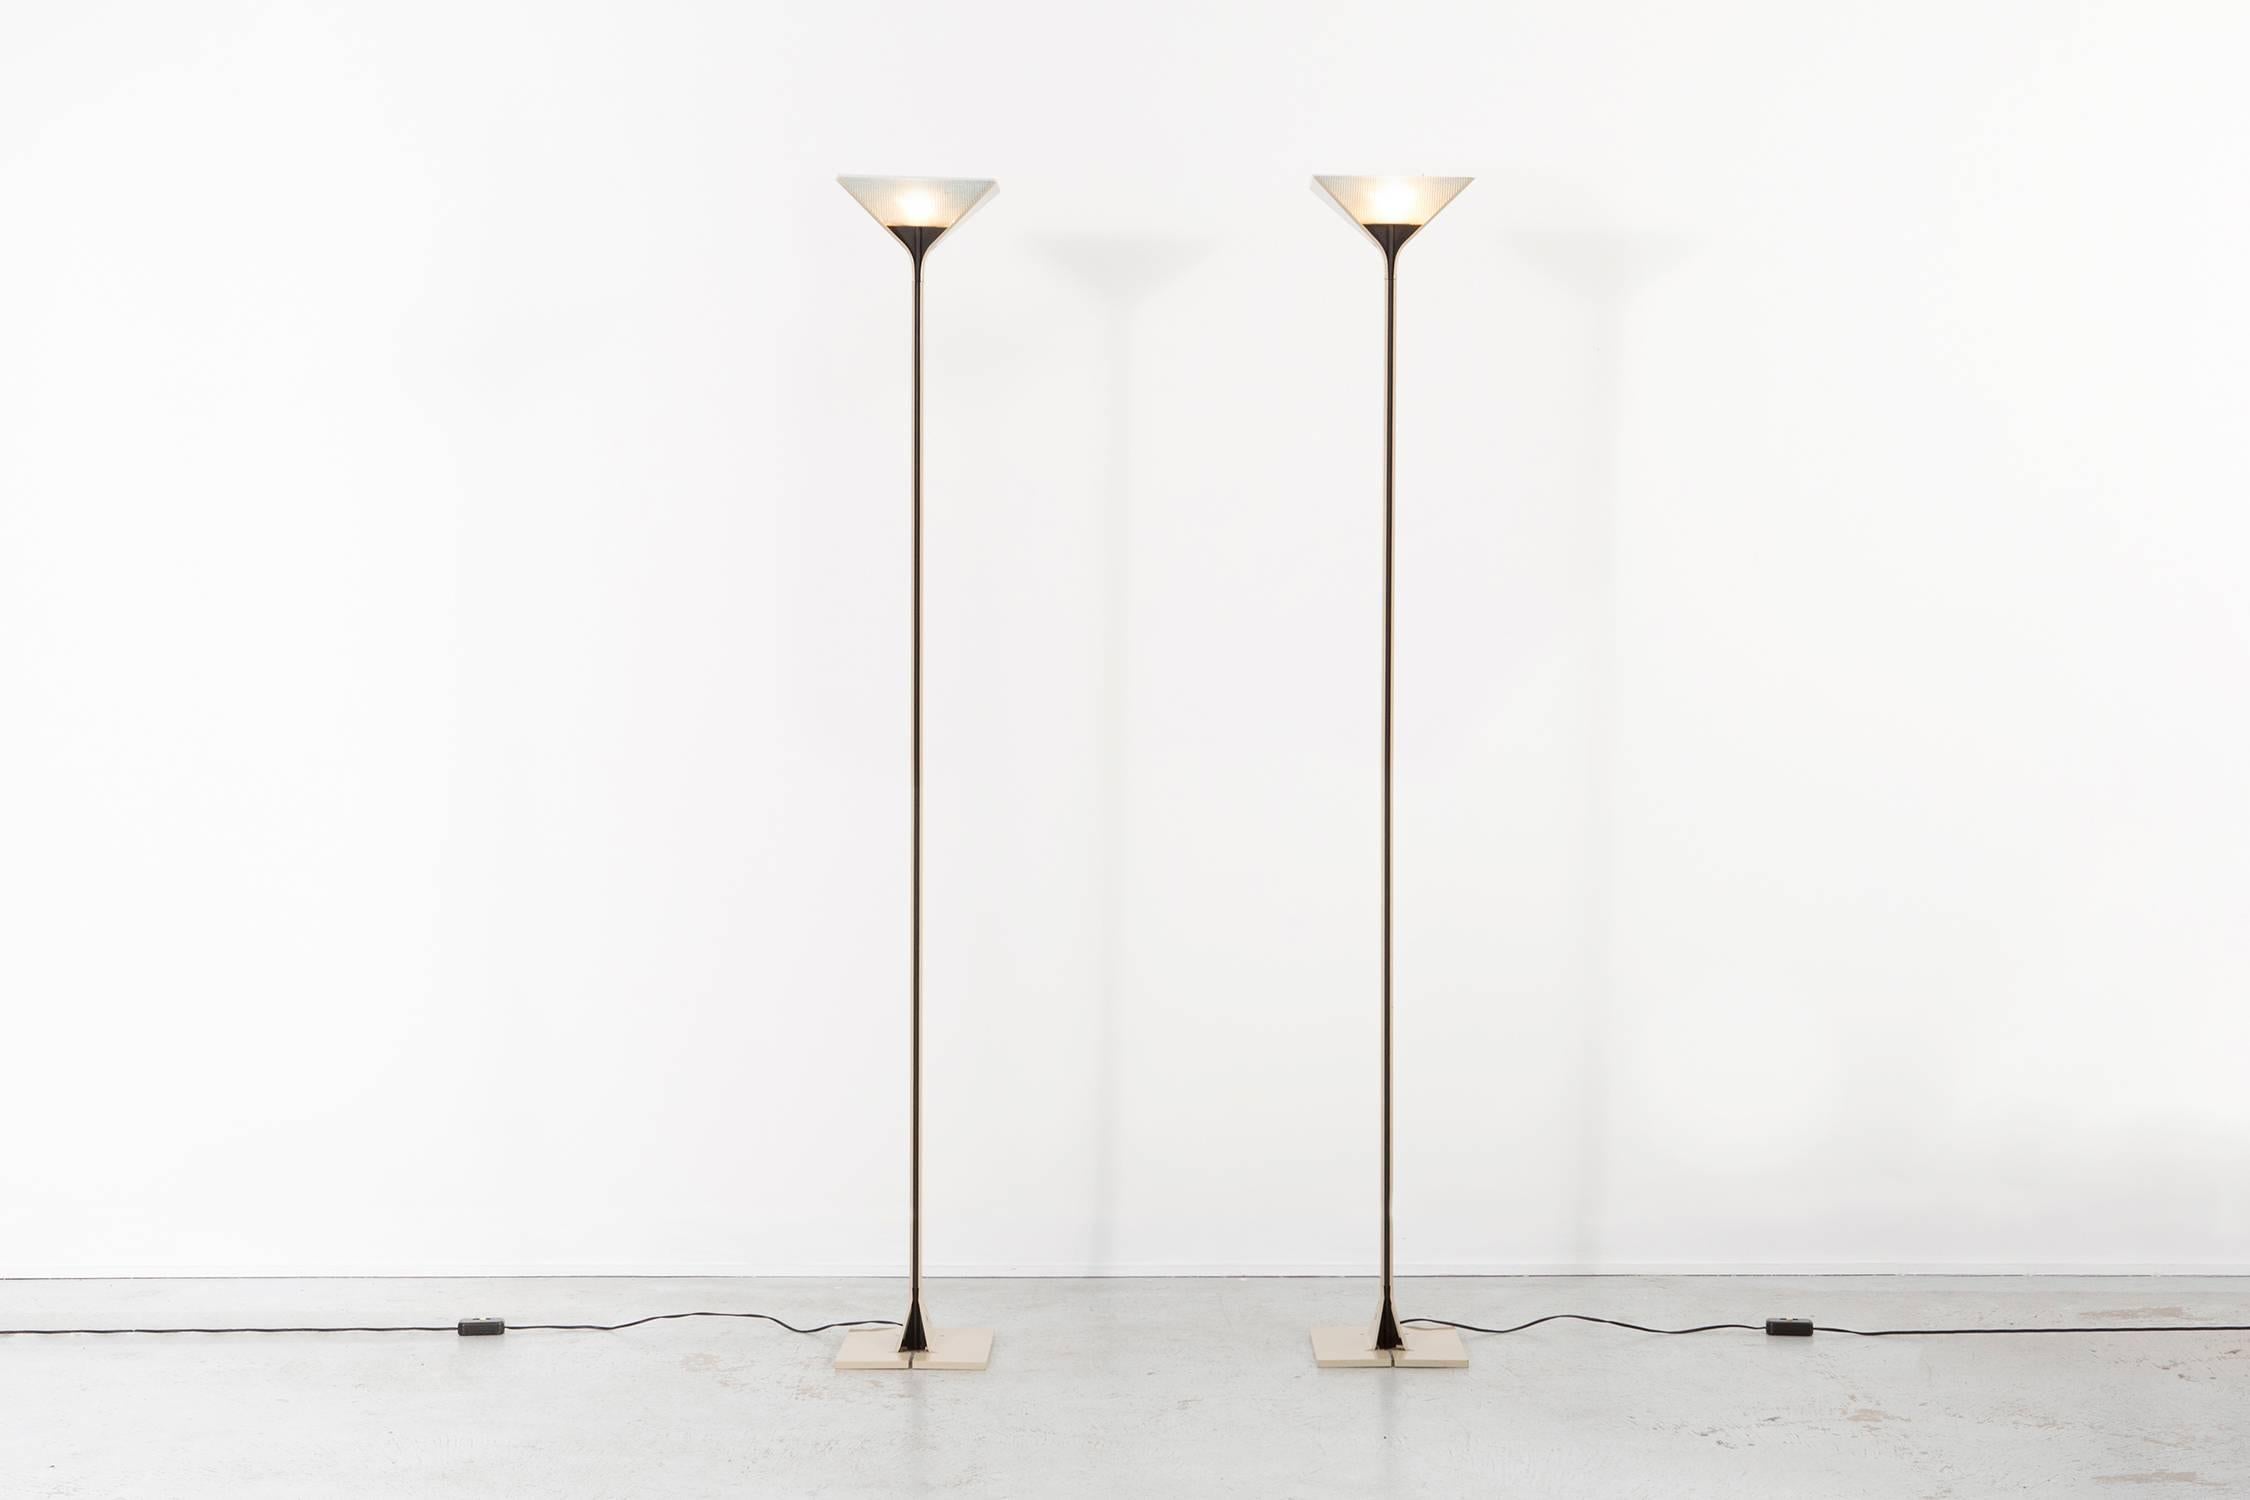 Floor lamps

designed by Tobia Scarpa for Flos

Italy, circa 1980s

steel and glass

Measures: 75 9/16” H x 10 ¼” W x 9 13/16” D

Sold as a set.